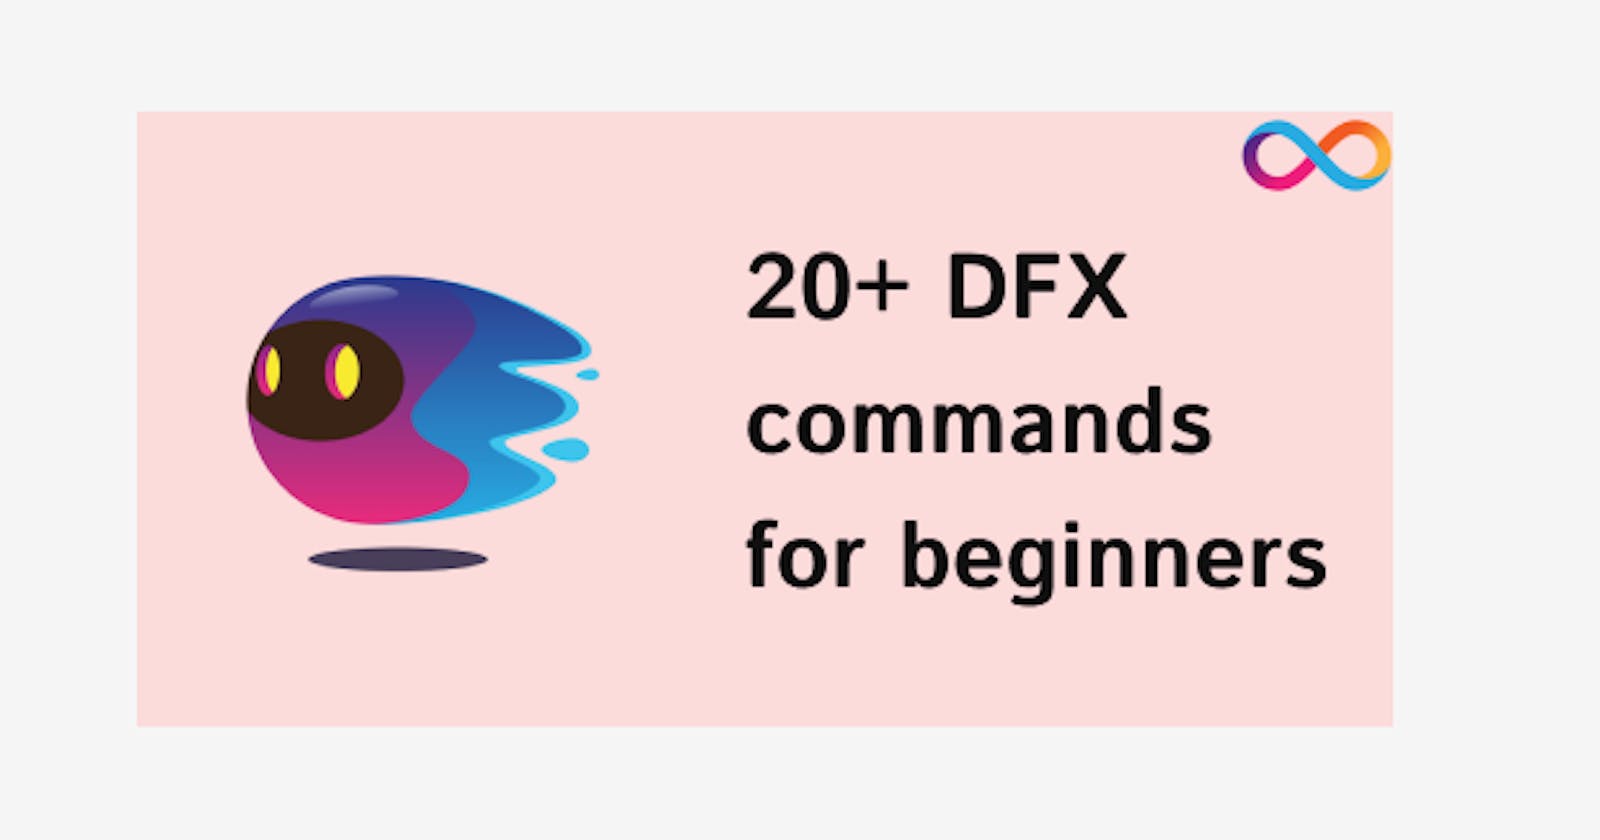 Commonly used dfx commands for beginners